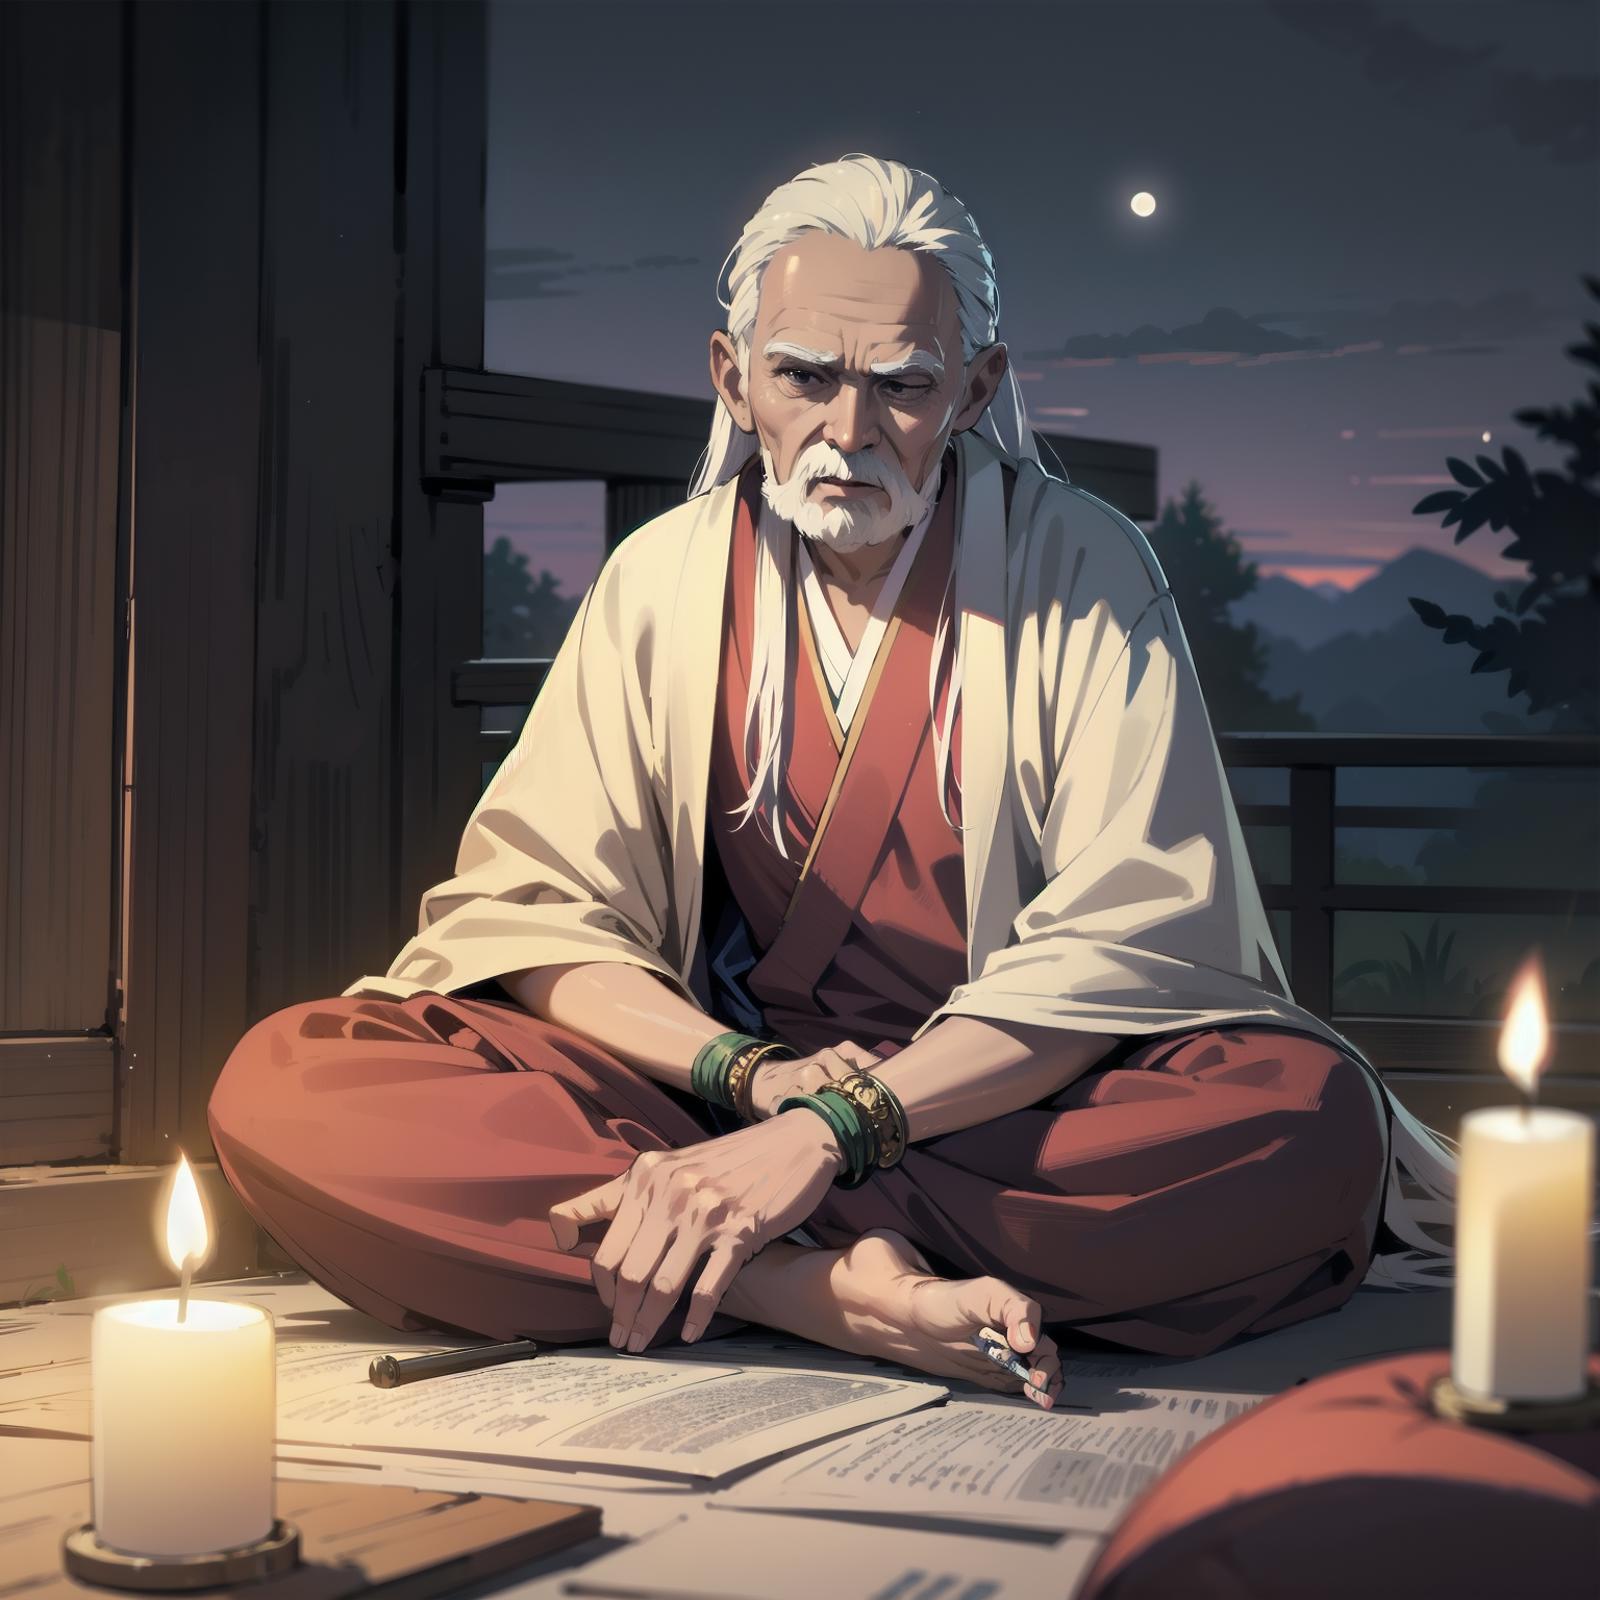 A man sitting on the ground in front of a candle, with a pen in his hand.